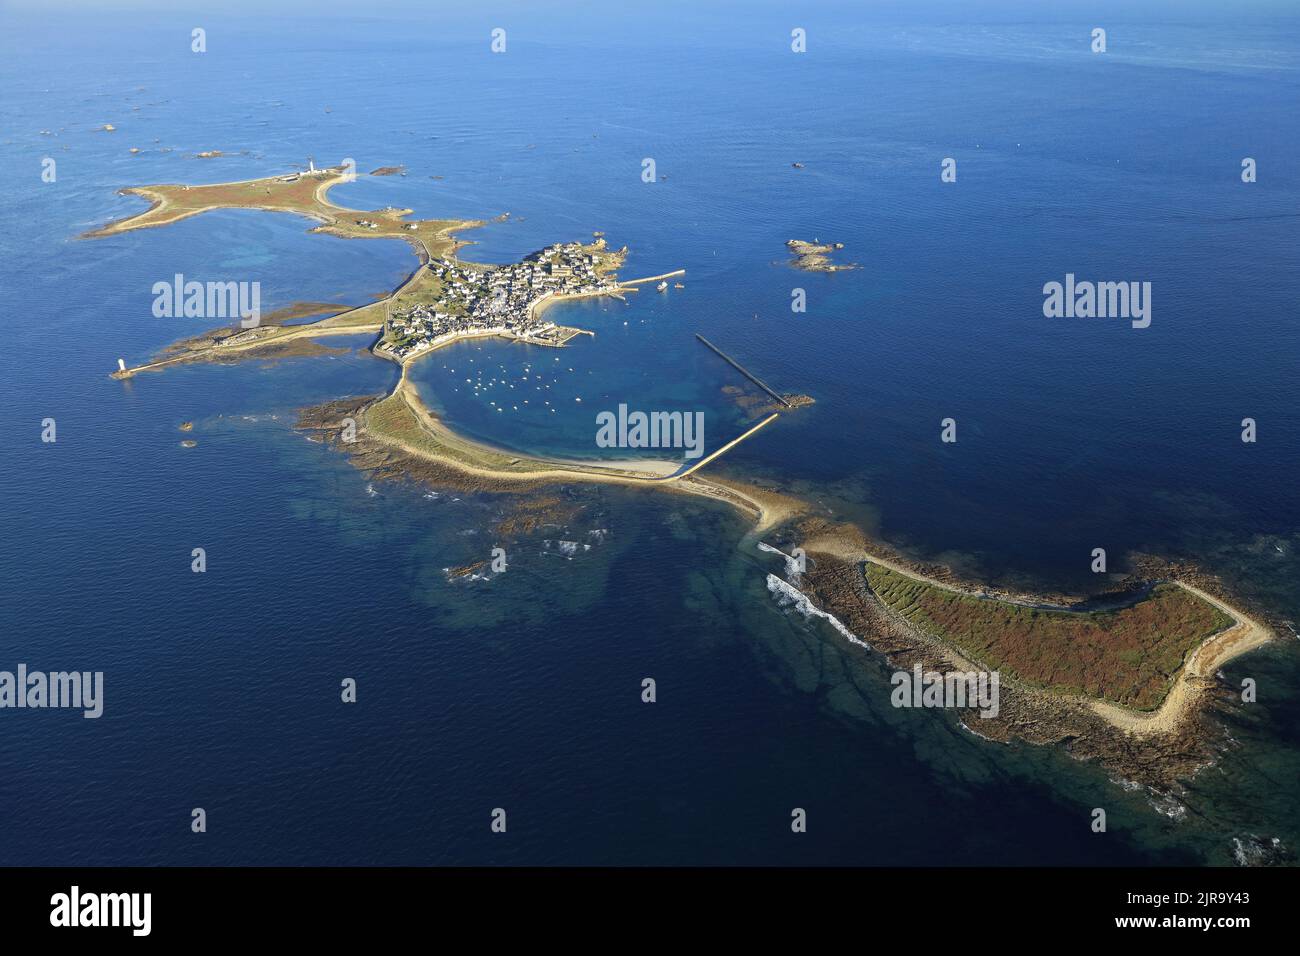 Finistere (Brittany, north-western France): aerial view of the 'Ile de Sein' island, south-east of the Celtic Sea. Top right of the picture, the islet Stock Photo